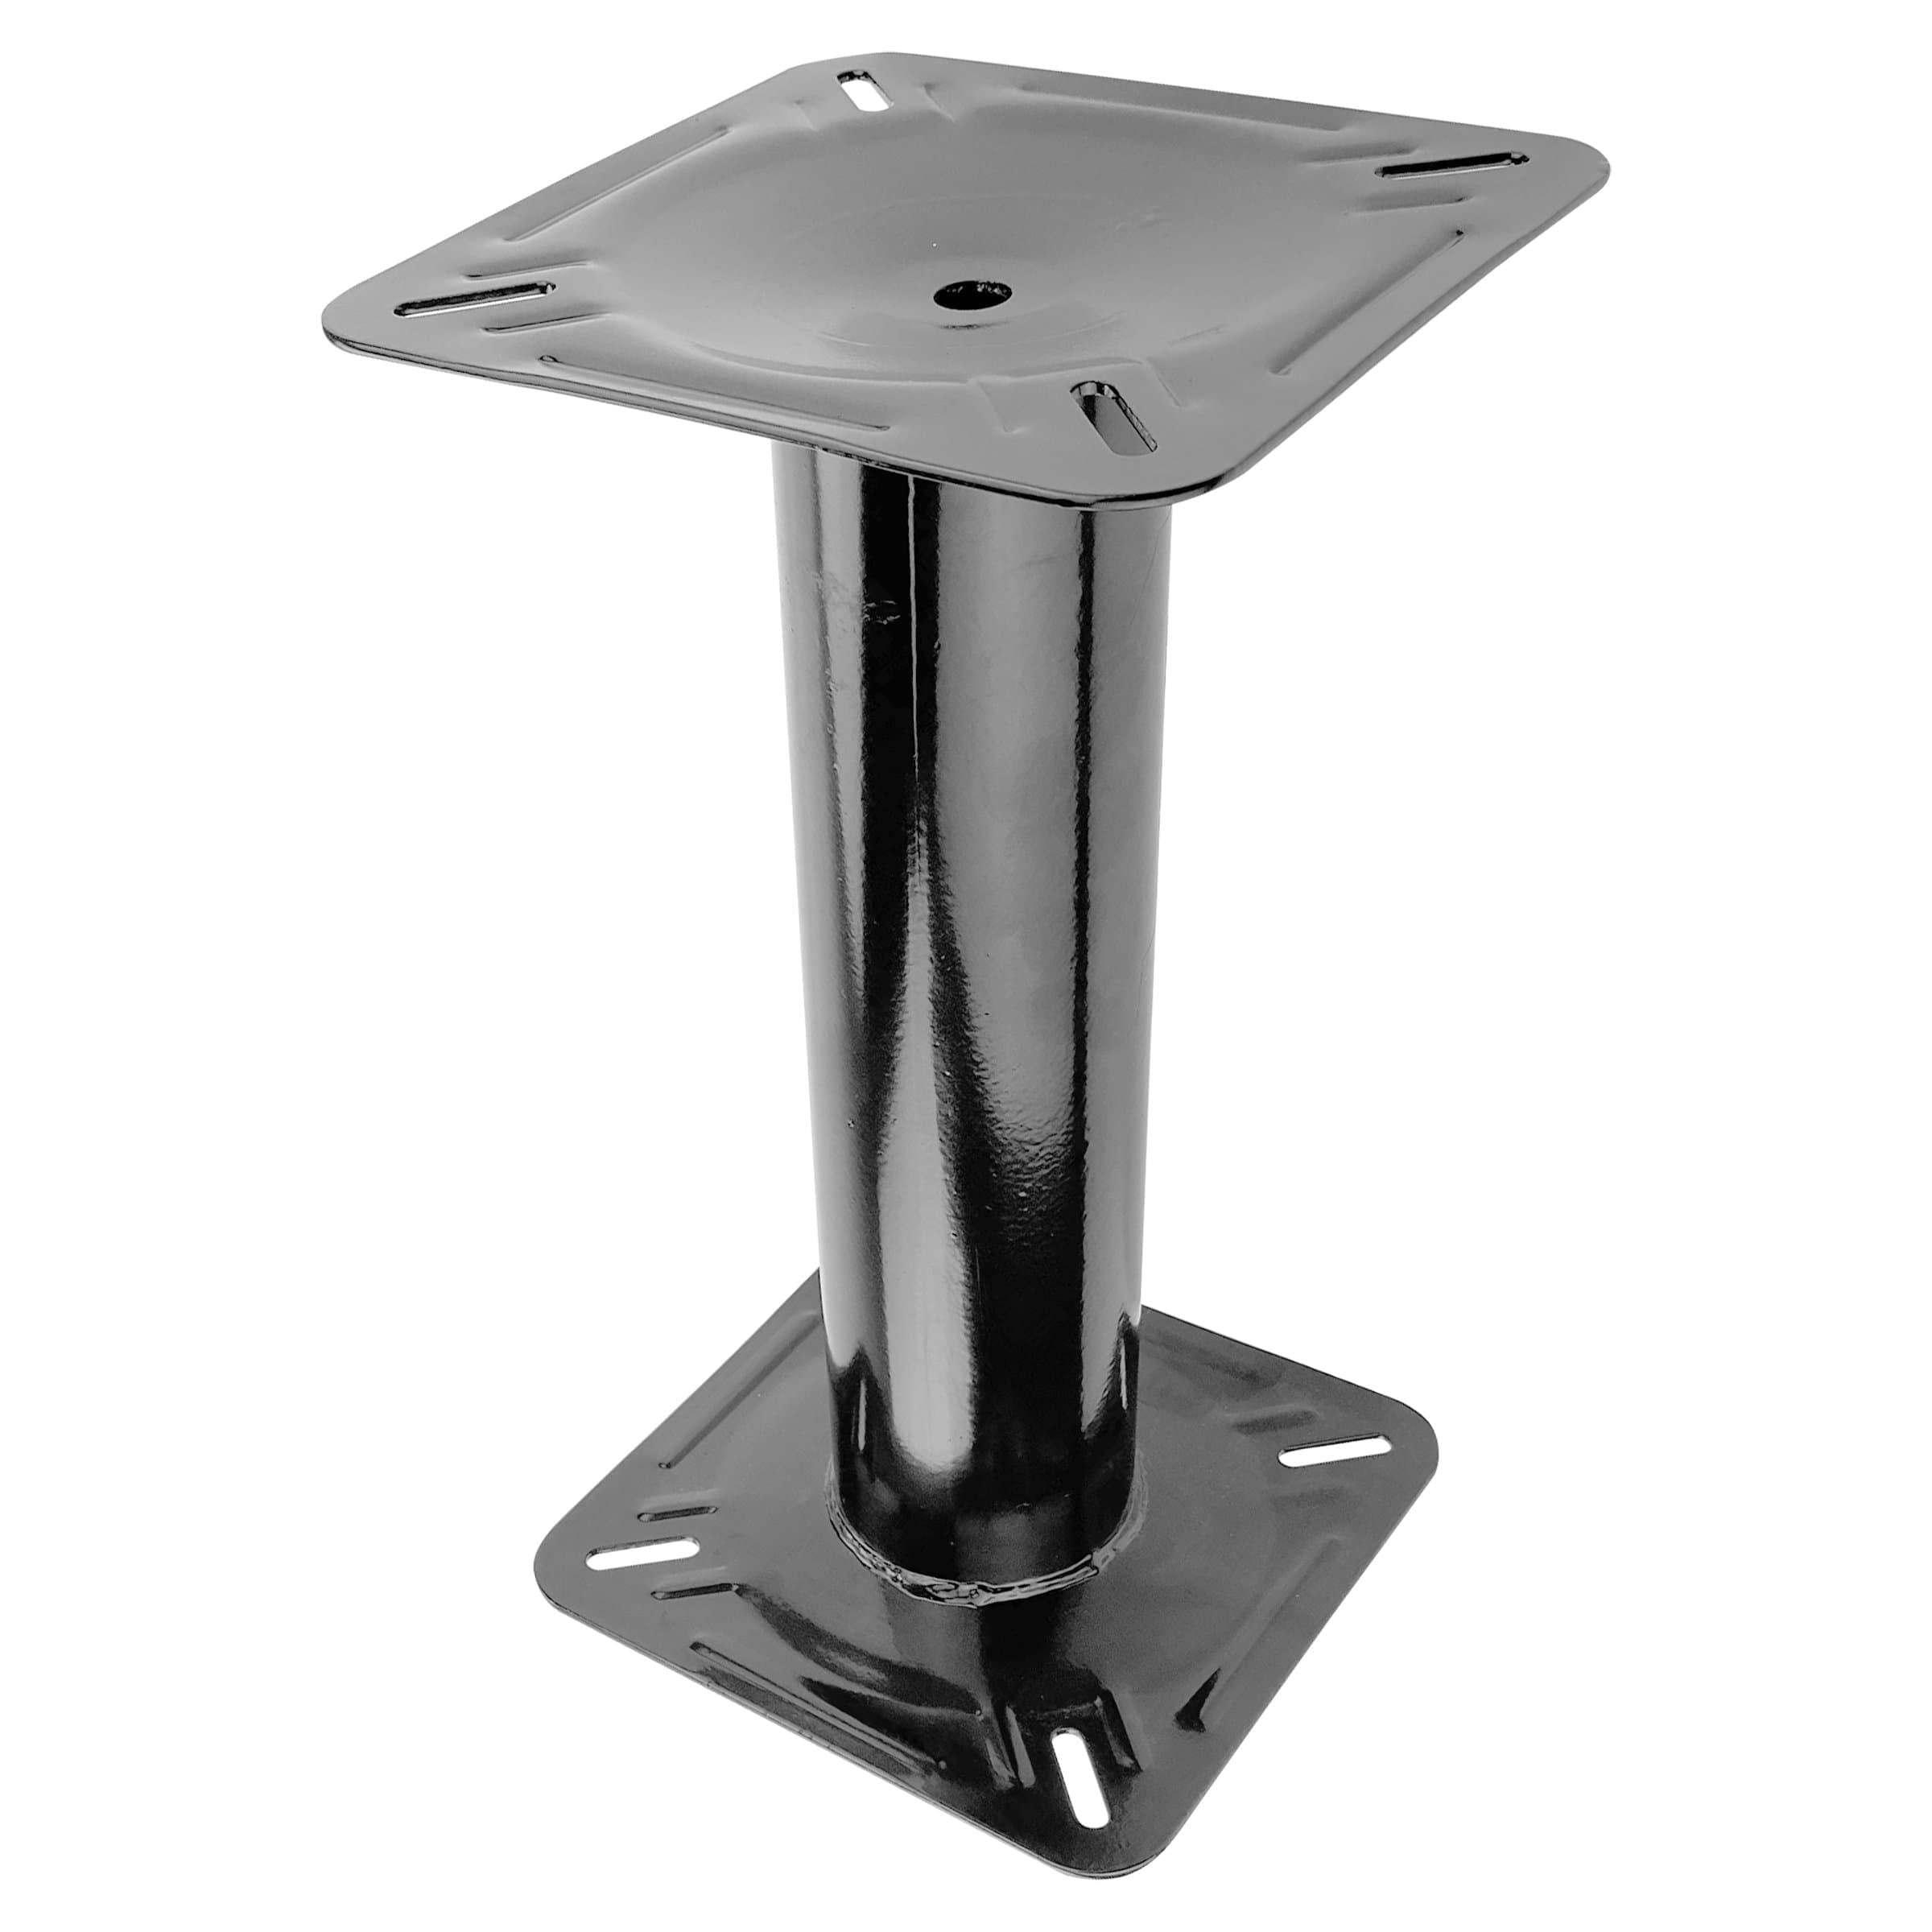 New OEM Stainless Steel Boat Chair Pedestal Base 5833385 9" 